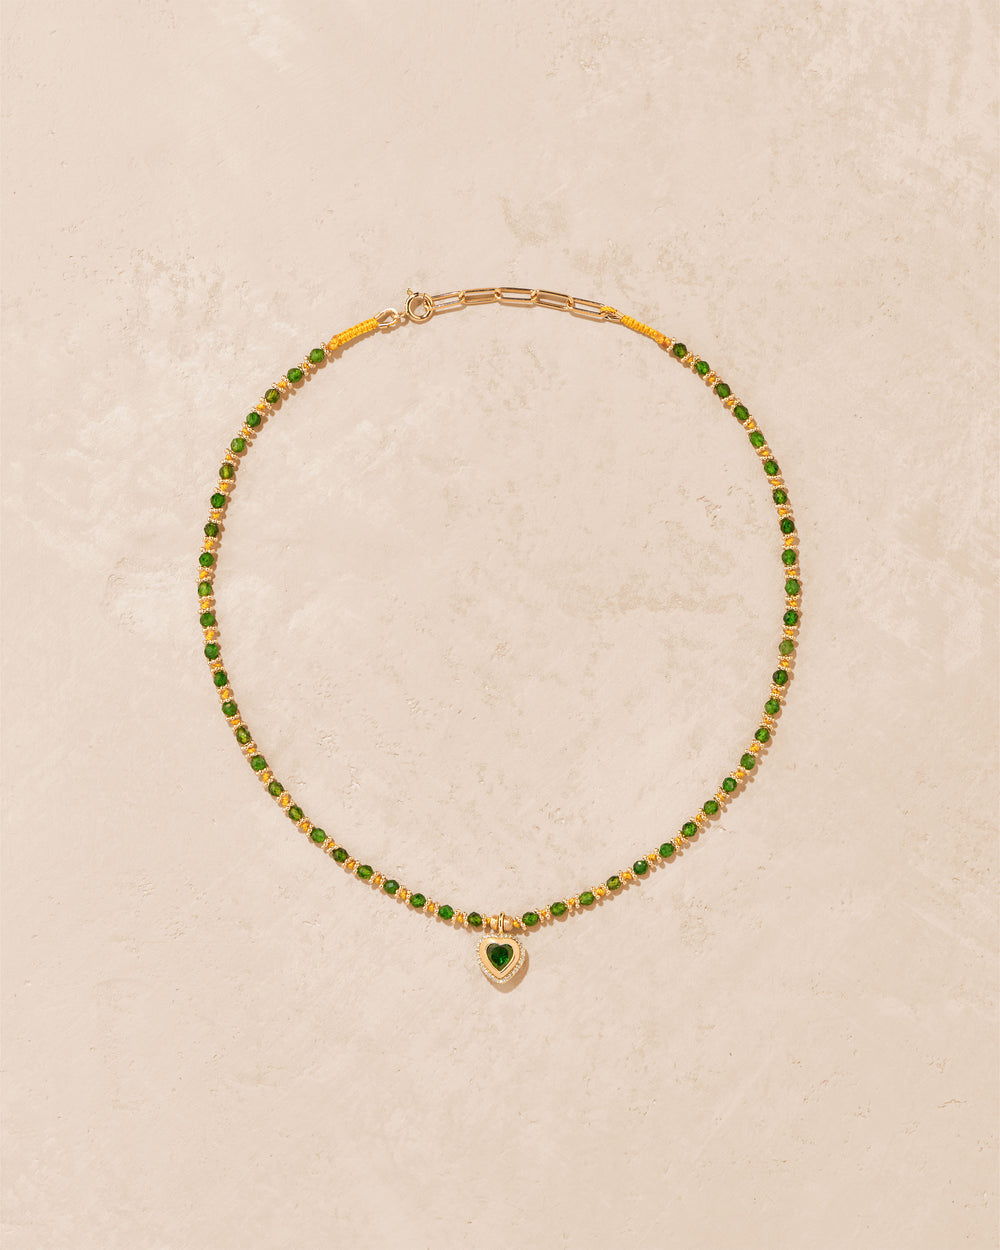 Gini K Diopside necklace